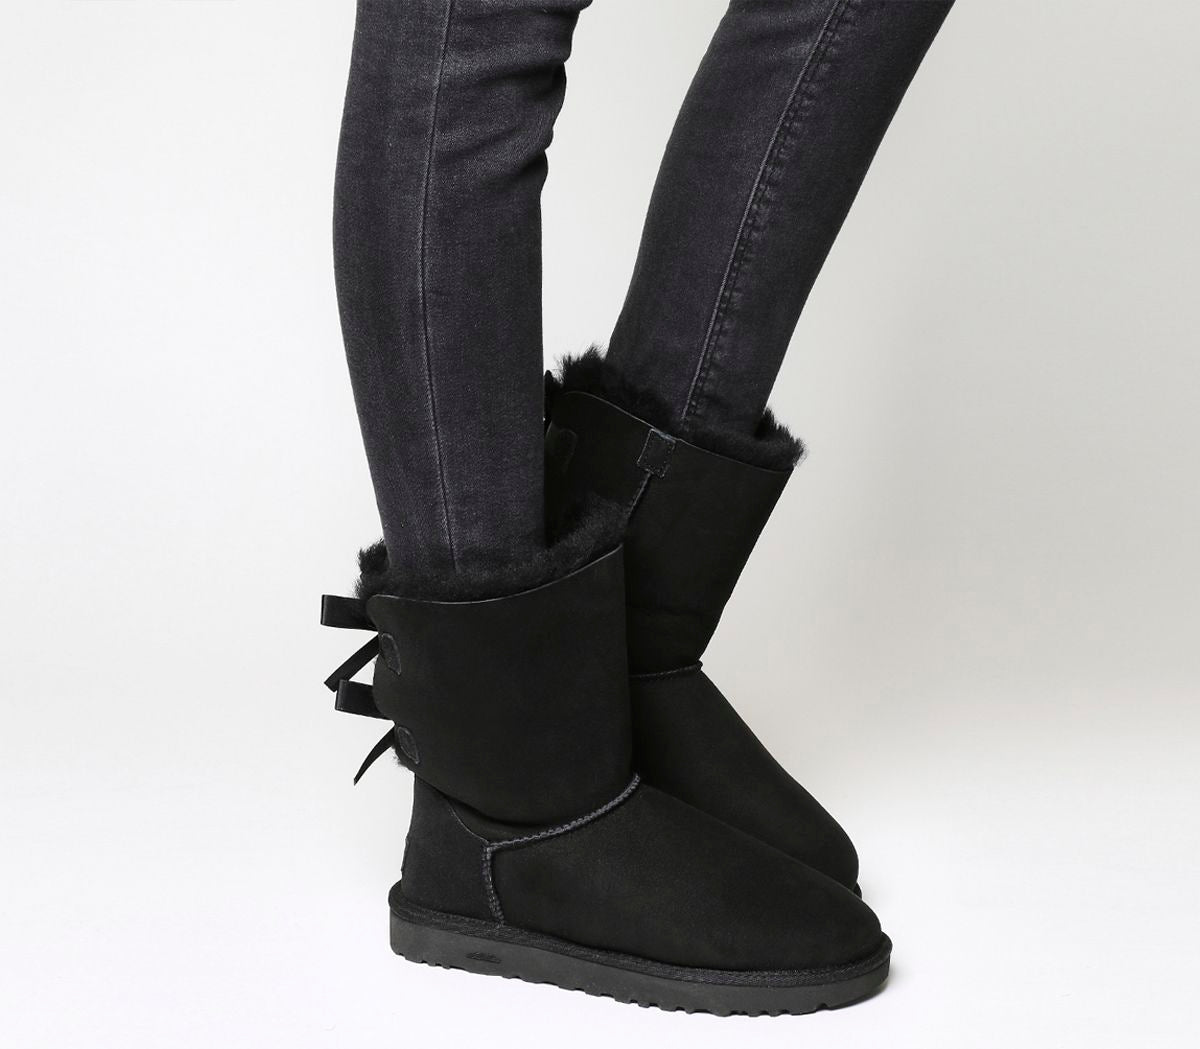 ugg bailey bow 2 boots